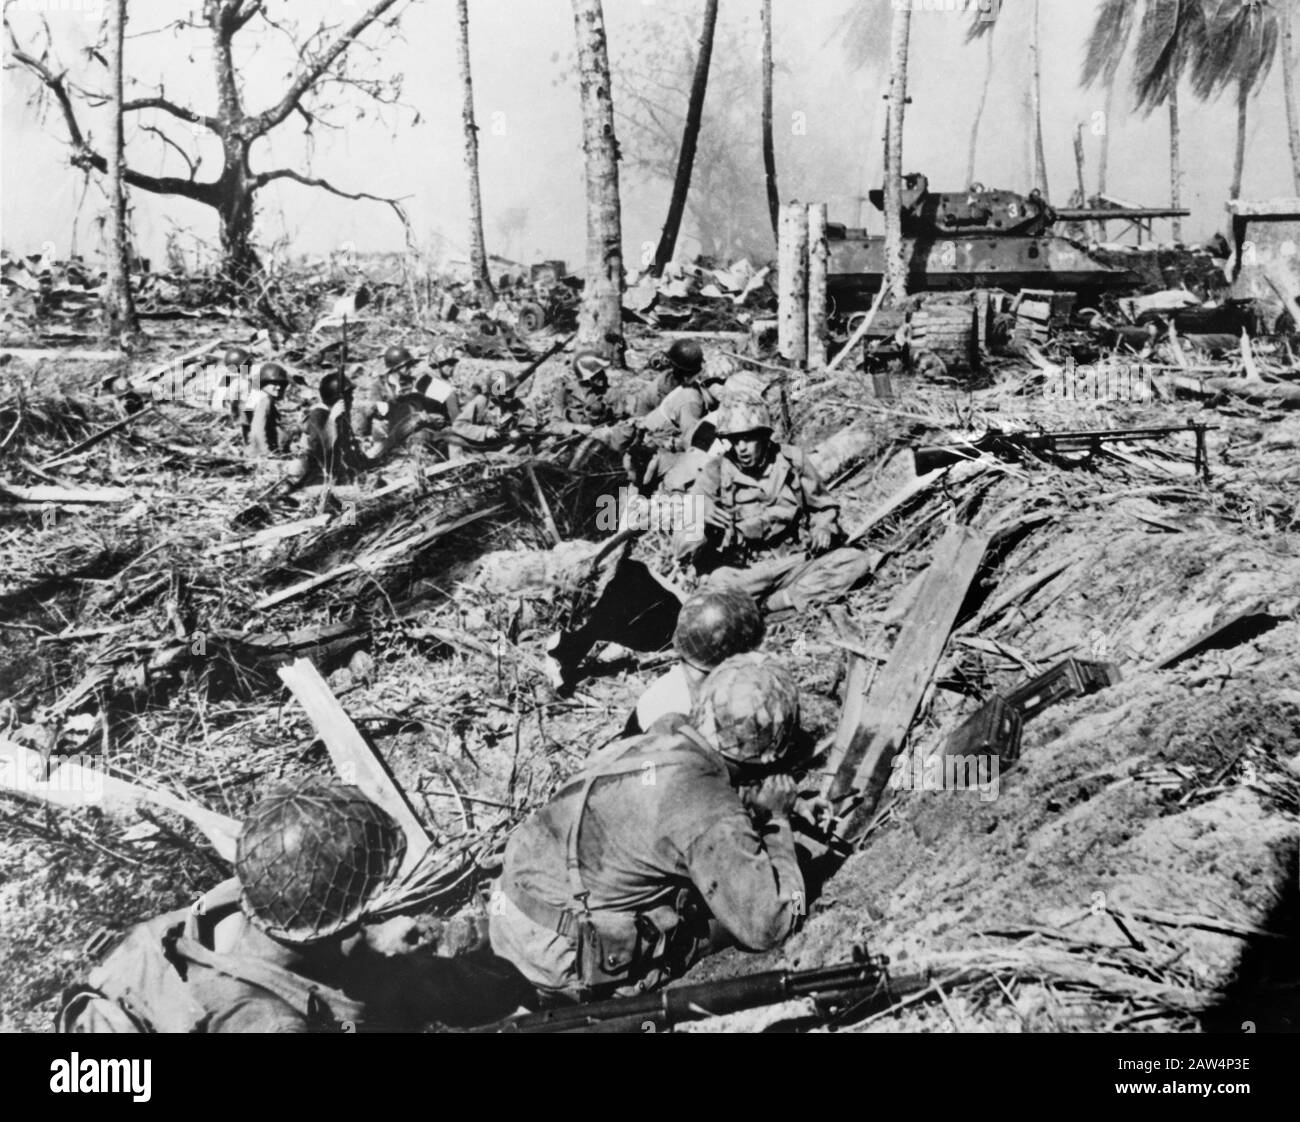 7th Armored Division of U.S. Army Si Fermò In Anticipo mentre Tank Blasted Path in Japanese Positions, Kwajalein Island, U.S. Army photo, febbraio 1944 Foto Stock